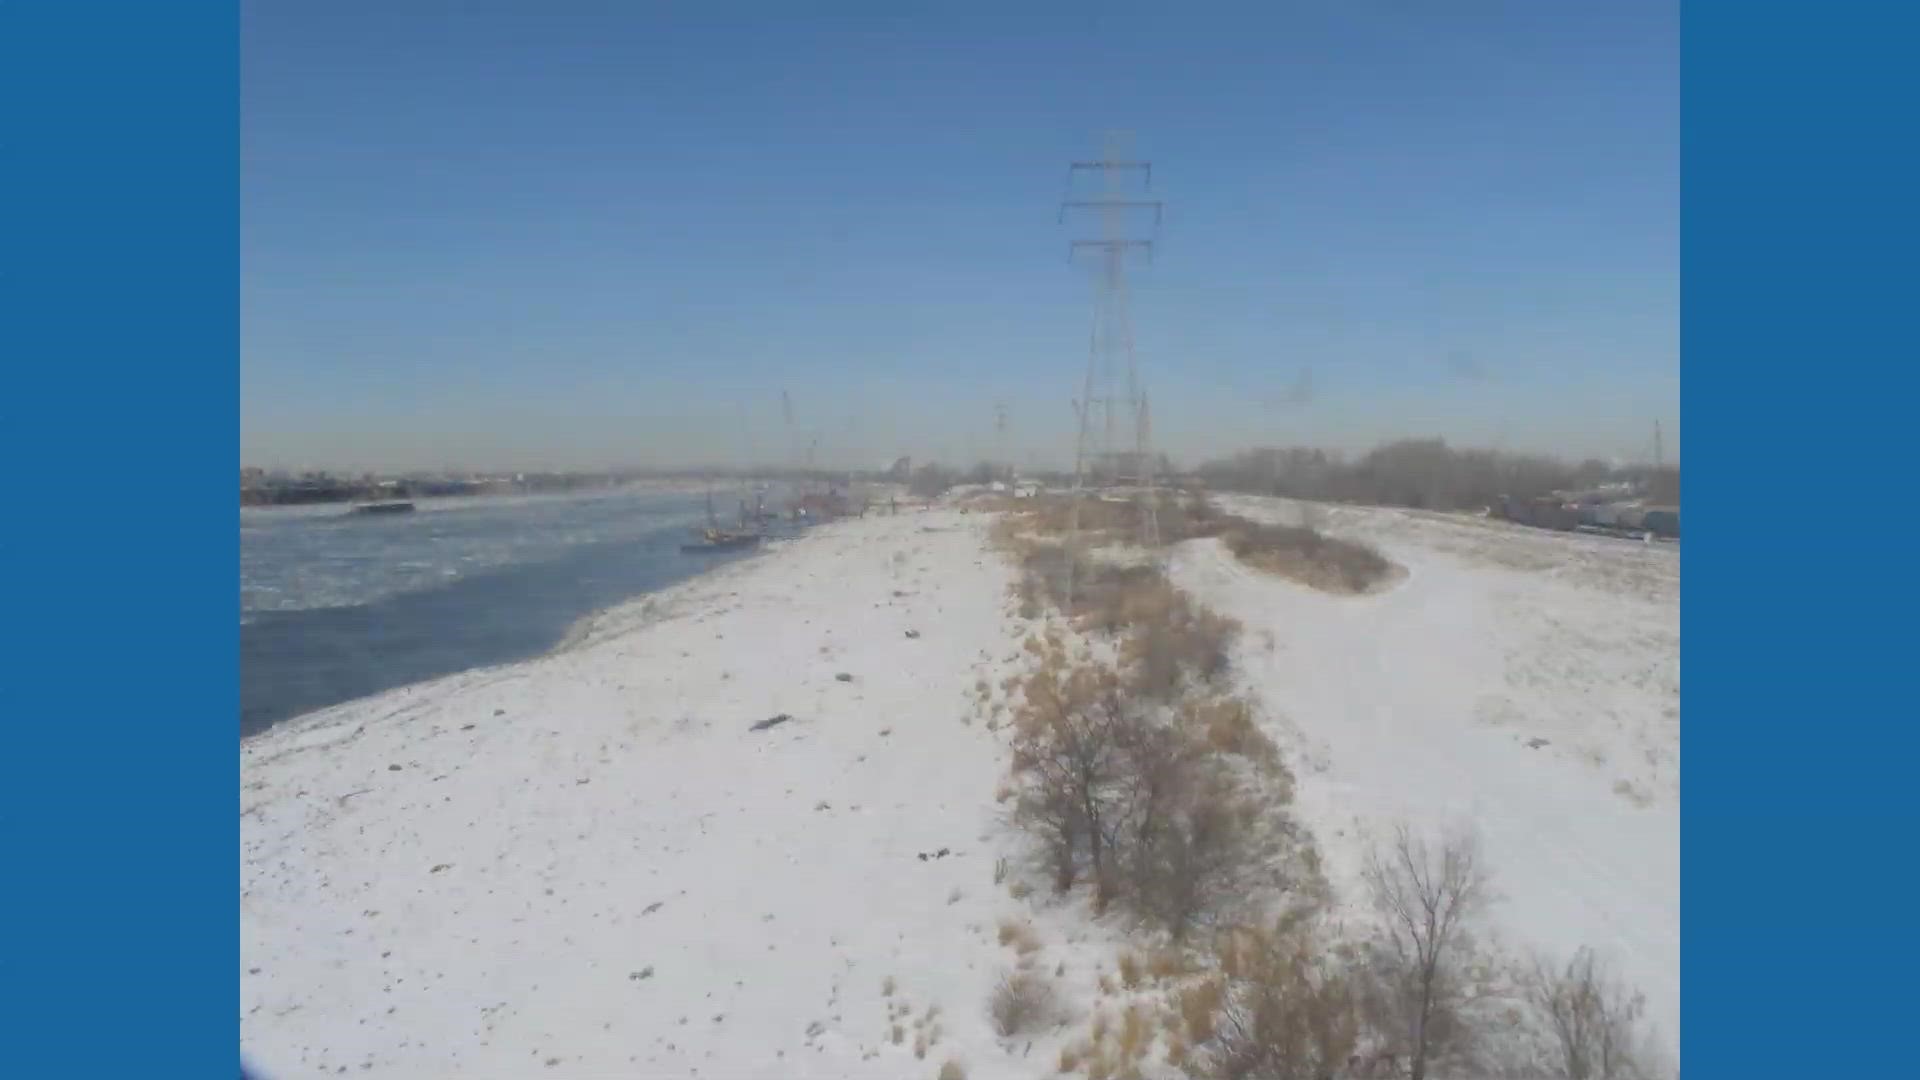 OxBlue recorded a timelapse of the building of the Stan Musial Veterans Memorial Bridge. The bridge opened in 2014.